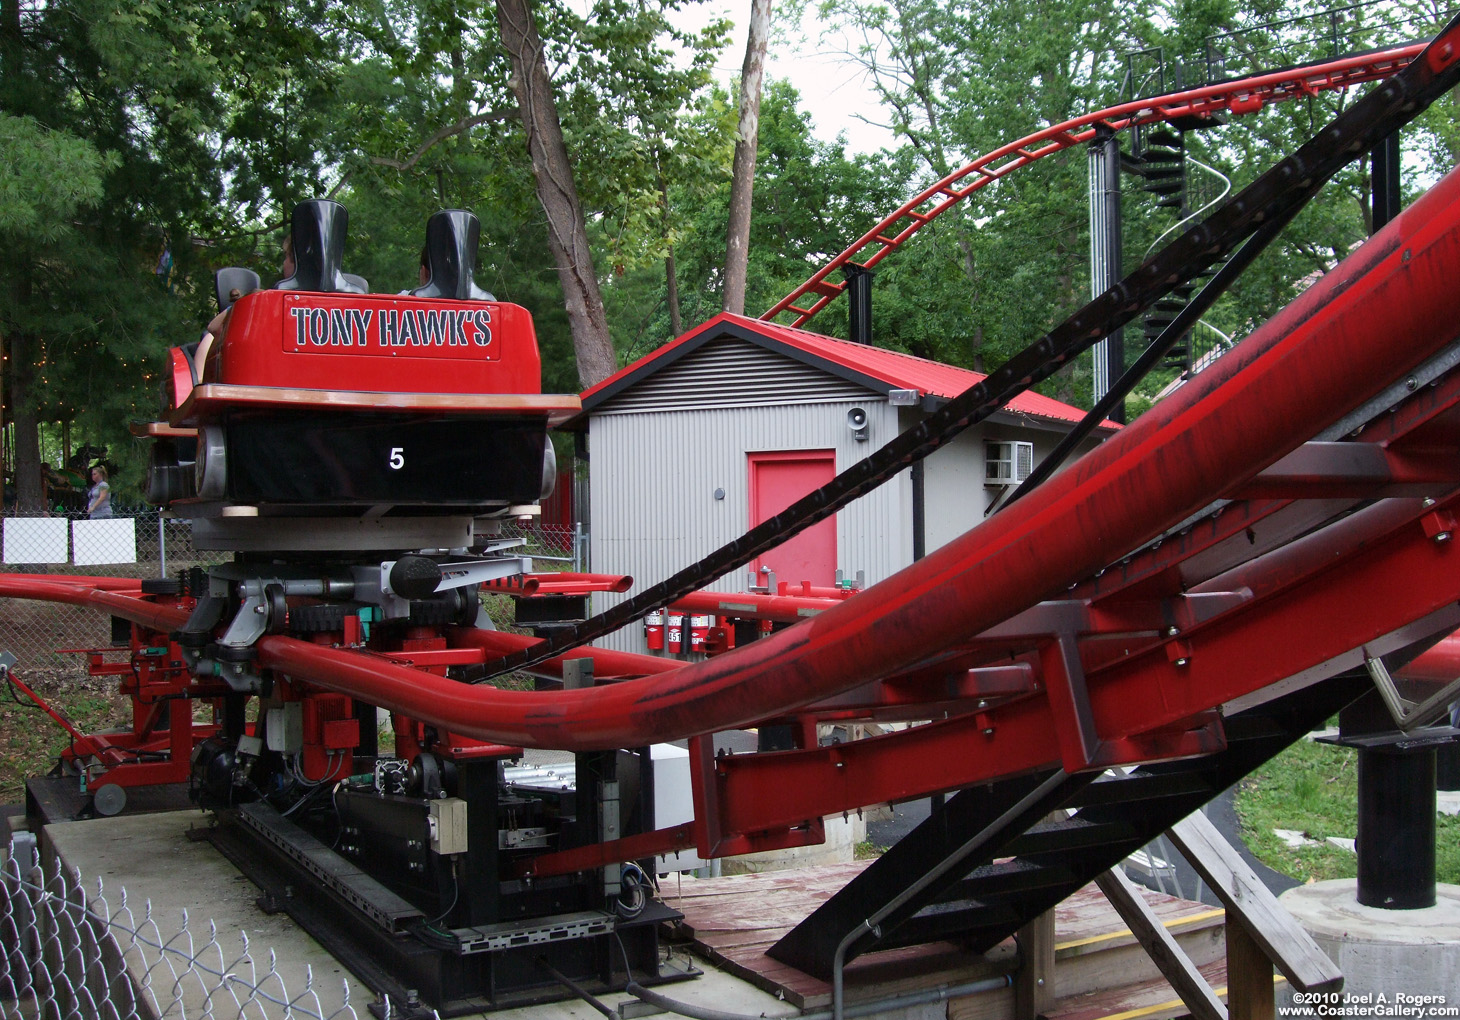 A coaster going to the chain lift